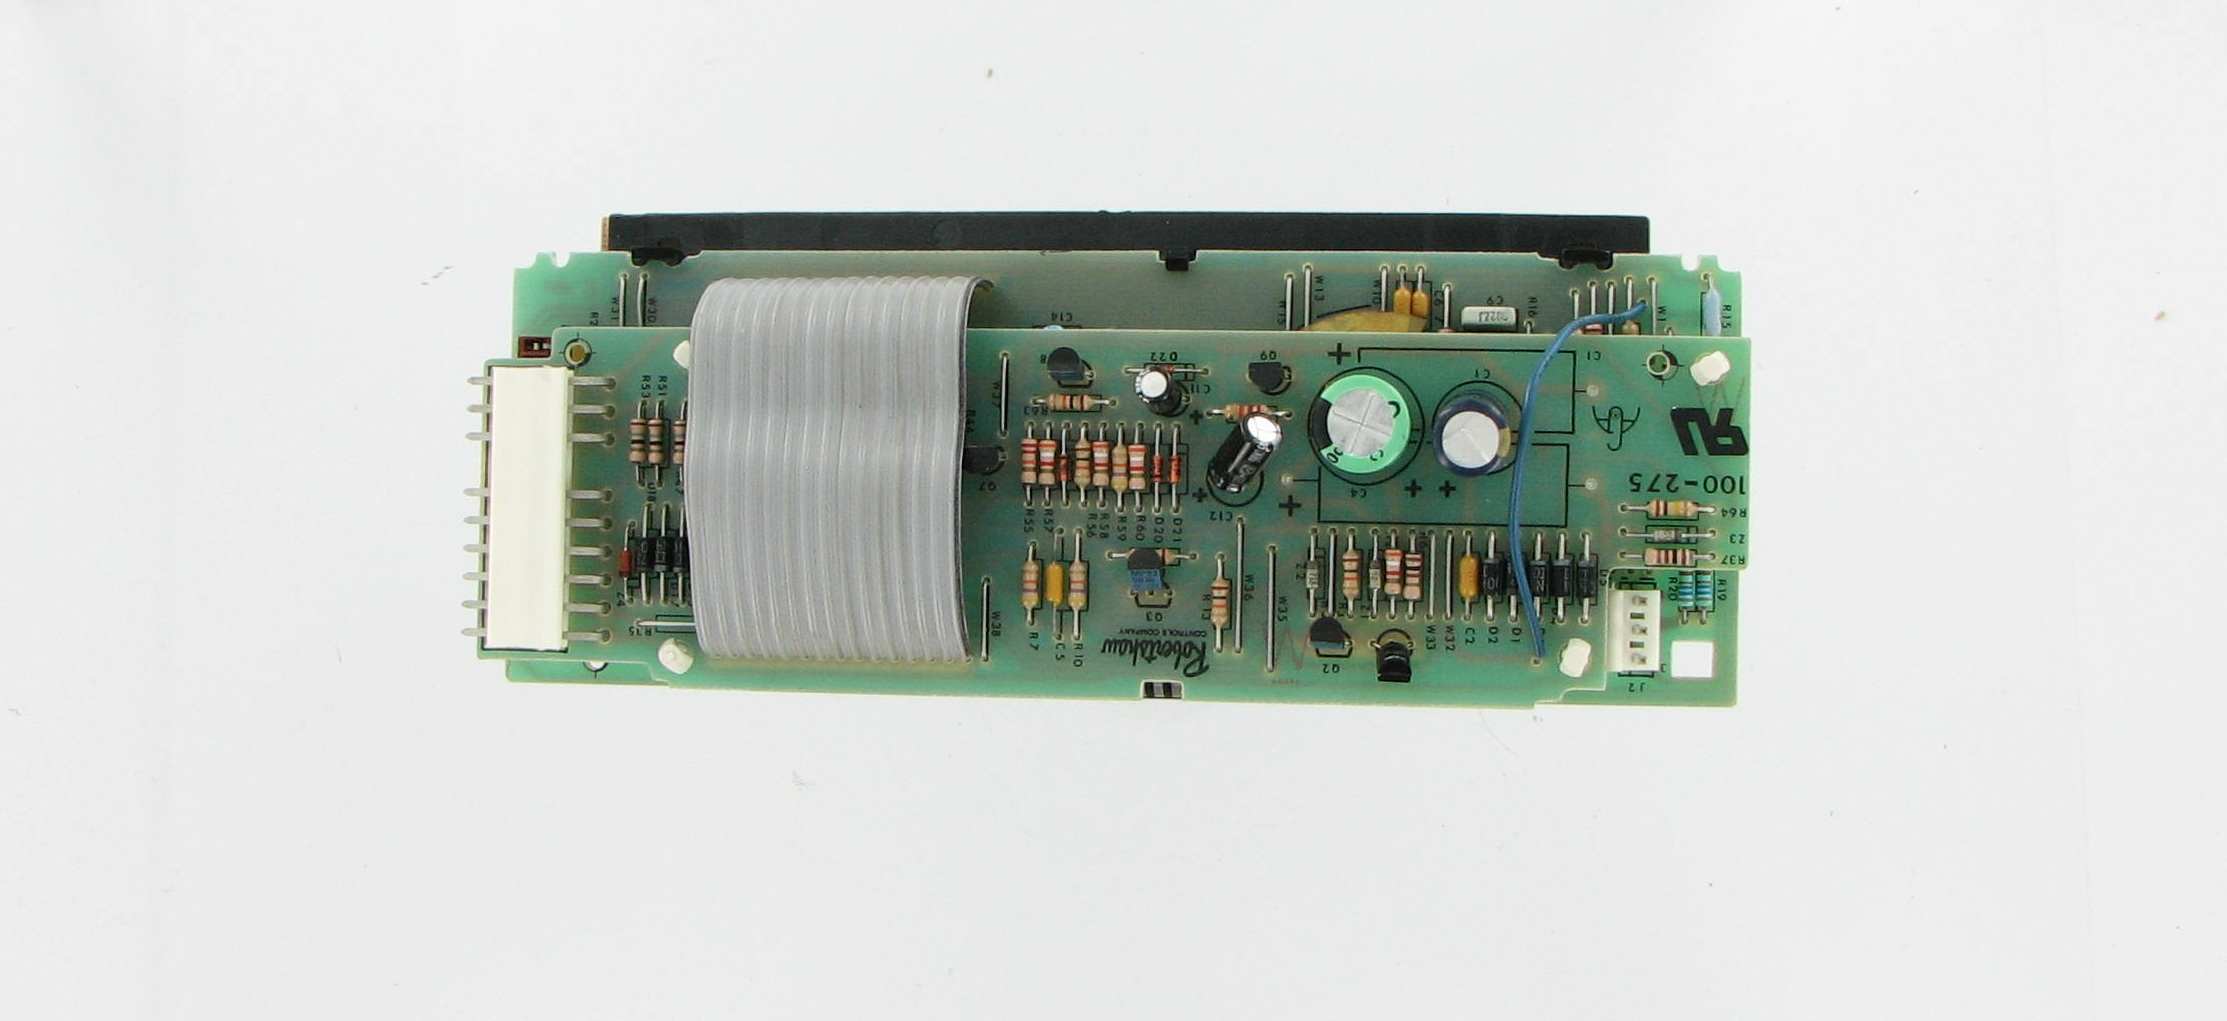 Maytag 7601p622-60 Range Main Board Control Repair Service for sale online 